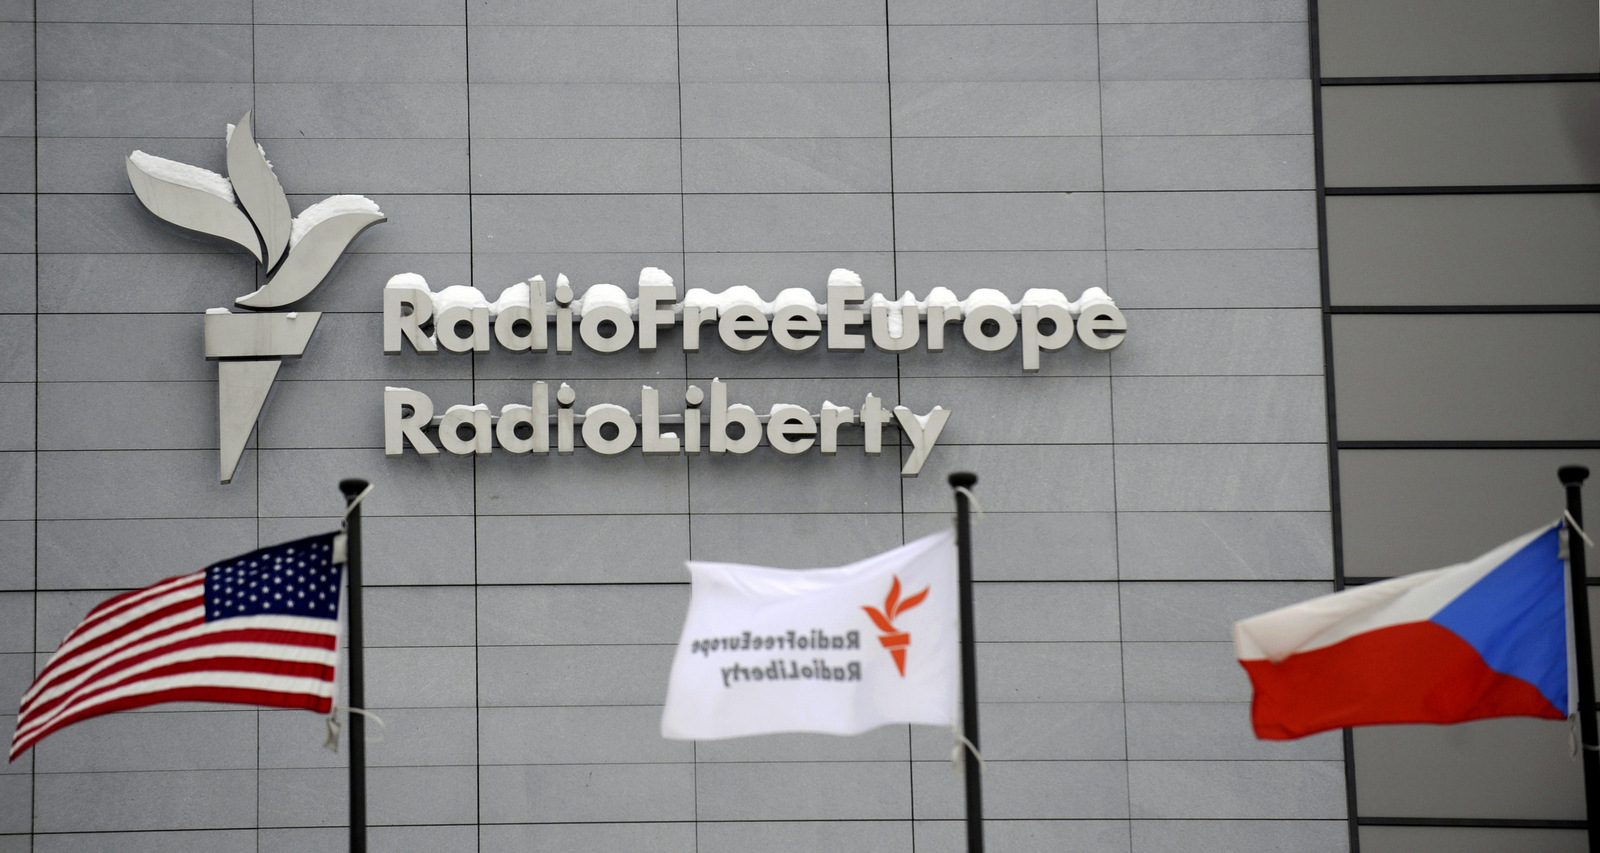 The headquarters of Radio Free Europe/Radio Liberty (RFE/RL) seen with the United States, RFE/RL and the Czech Republic flags in the foreground, in Prague Friday, Jan. 15, 2010. (AP /CTK, Michal Kamaryt)